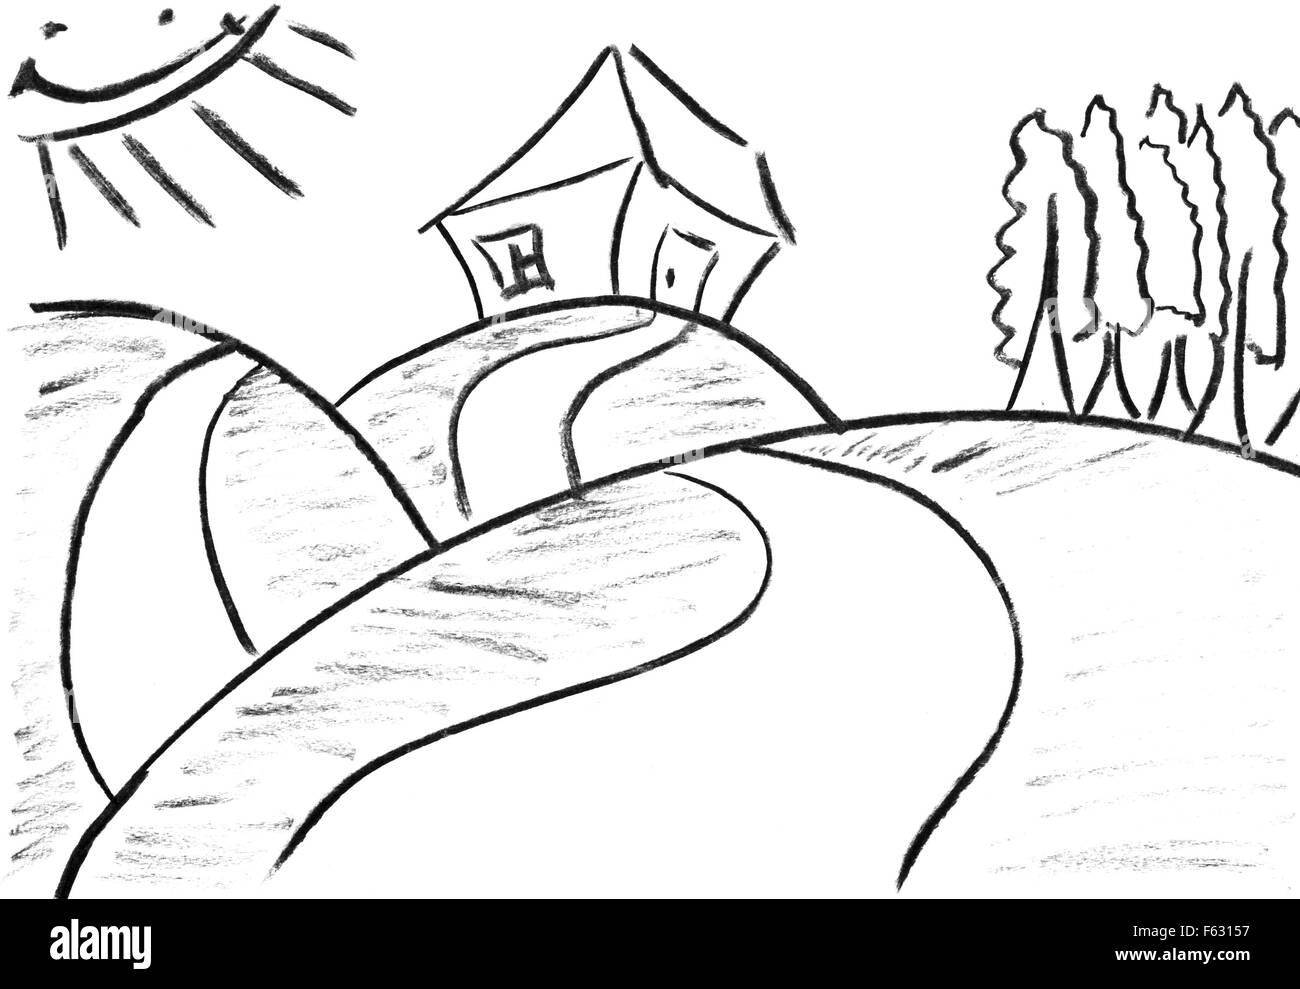 Pencil sketch of funny house on hill Stock Photo